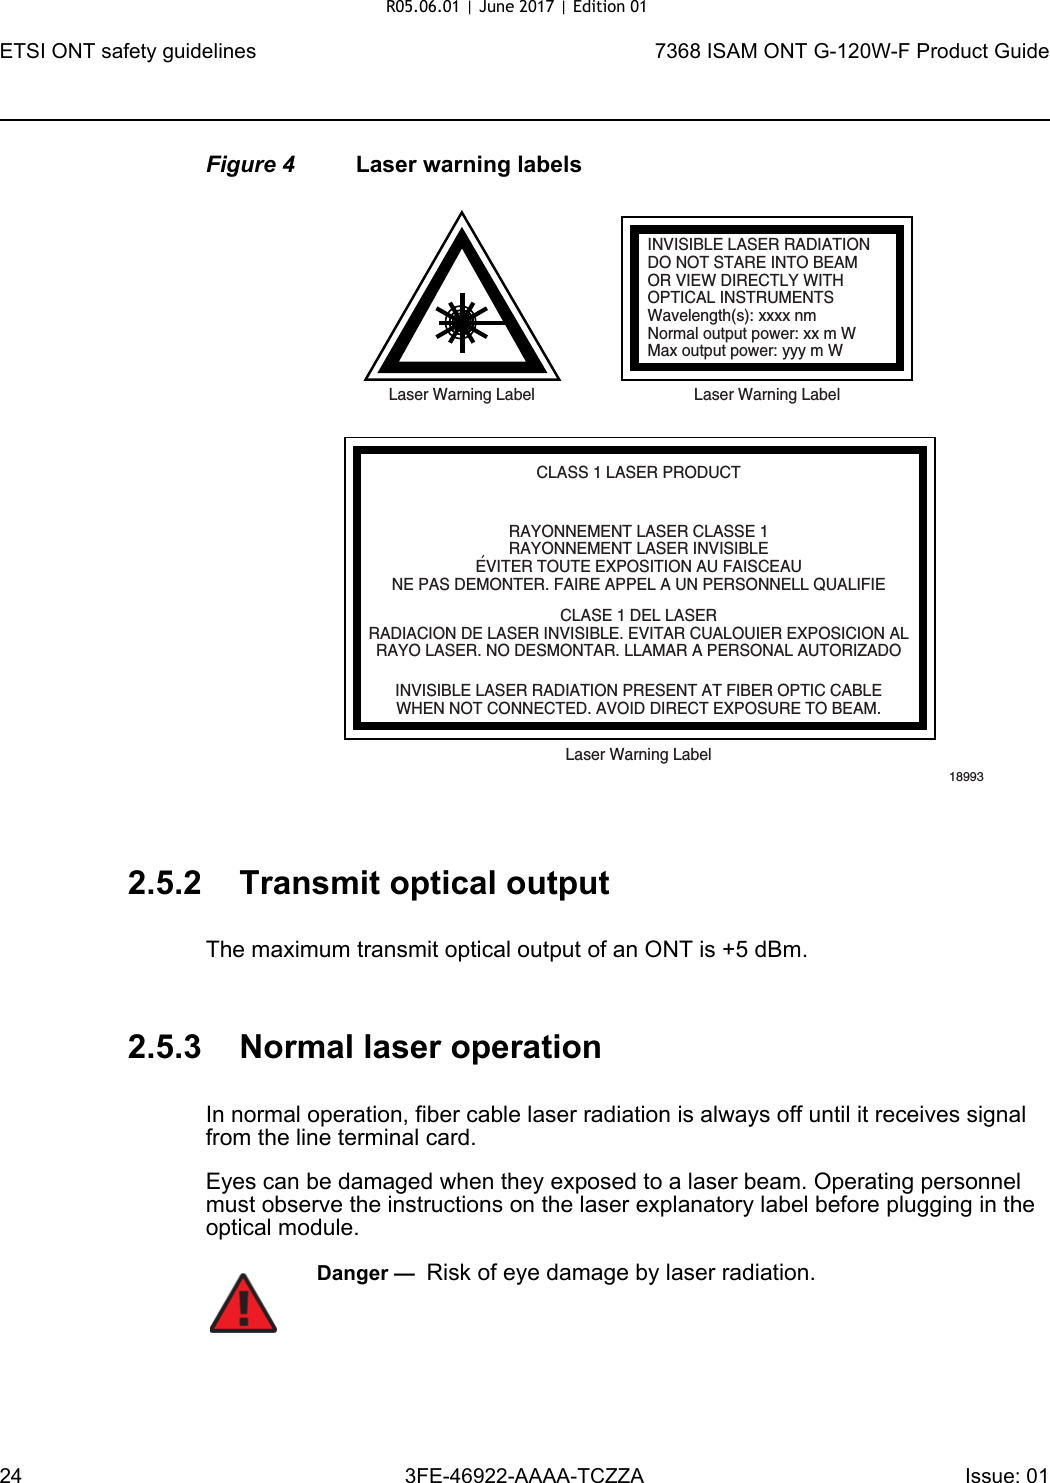 ETSI ONT safety guidelines247368 ISAM ONT G-120W-F Product Guide3FE-46922-AAAA-TCZZA Issue: 01 Figure 4 Laser warning labels2.5.2 Transmit optical outputThe maximum transmit optical output of an ONT is +5 dBm.2.5.3 Normal laser operationIn normal operation, fiber cable laser radiation is always off until it receives signal from the line terminal card.Eyes can be damaged when they exposed to a laser beam. Operating personnel must observe the instructions on the laser explanatory label before plugging in the optical module.INVISIBLE LASER RADIATIONDO NOT STARE INTO BEAMOR VIEW DIRECTLY WITHOPTICAL INSTRUMENTSWavelength(s): xxxx nmNormal output power: xx m WMax output power: yyy m WLaser Warning Label Laser Warning LabelCLASS 1 LASER PRODUCTINVISIBLE LASER RADIATION PRESENT AT FIBER OPTIC CABLEWHEN NOT CONNECTED. AVOID DIRECT EXPOSURE TO BEAM.RAYONNEMENT LASER CLASSE 1RAYONNEMENT LASER INVISIBLEEVITER TOUTE EXPOSITION AU FAISCEAUNE PAS DEMONTER. FAIRE APPEL A UN PERSONNELL QUALIFIECLASE 1 DEL LASERRADIACION DE LASER INVISIBLE. EVITAR CUALOUIER EXPOSICION ALRAYO LASER. NO DESMONTAR. LLAMAR A PERSONAL AUTORIZADOLaser Warning Label18993&apos;Danger —  Risk of eye damage by laser radiation.R05.06.01 | June 2017 | Edition 01 